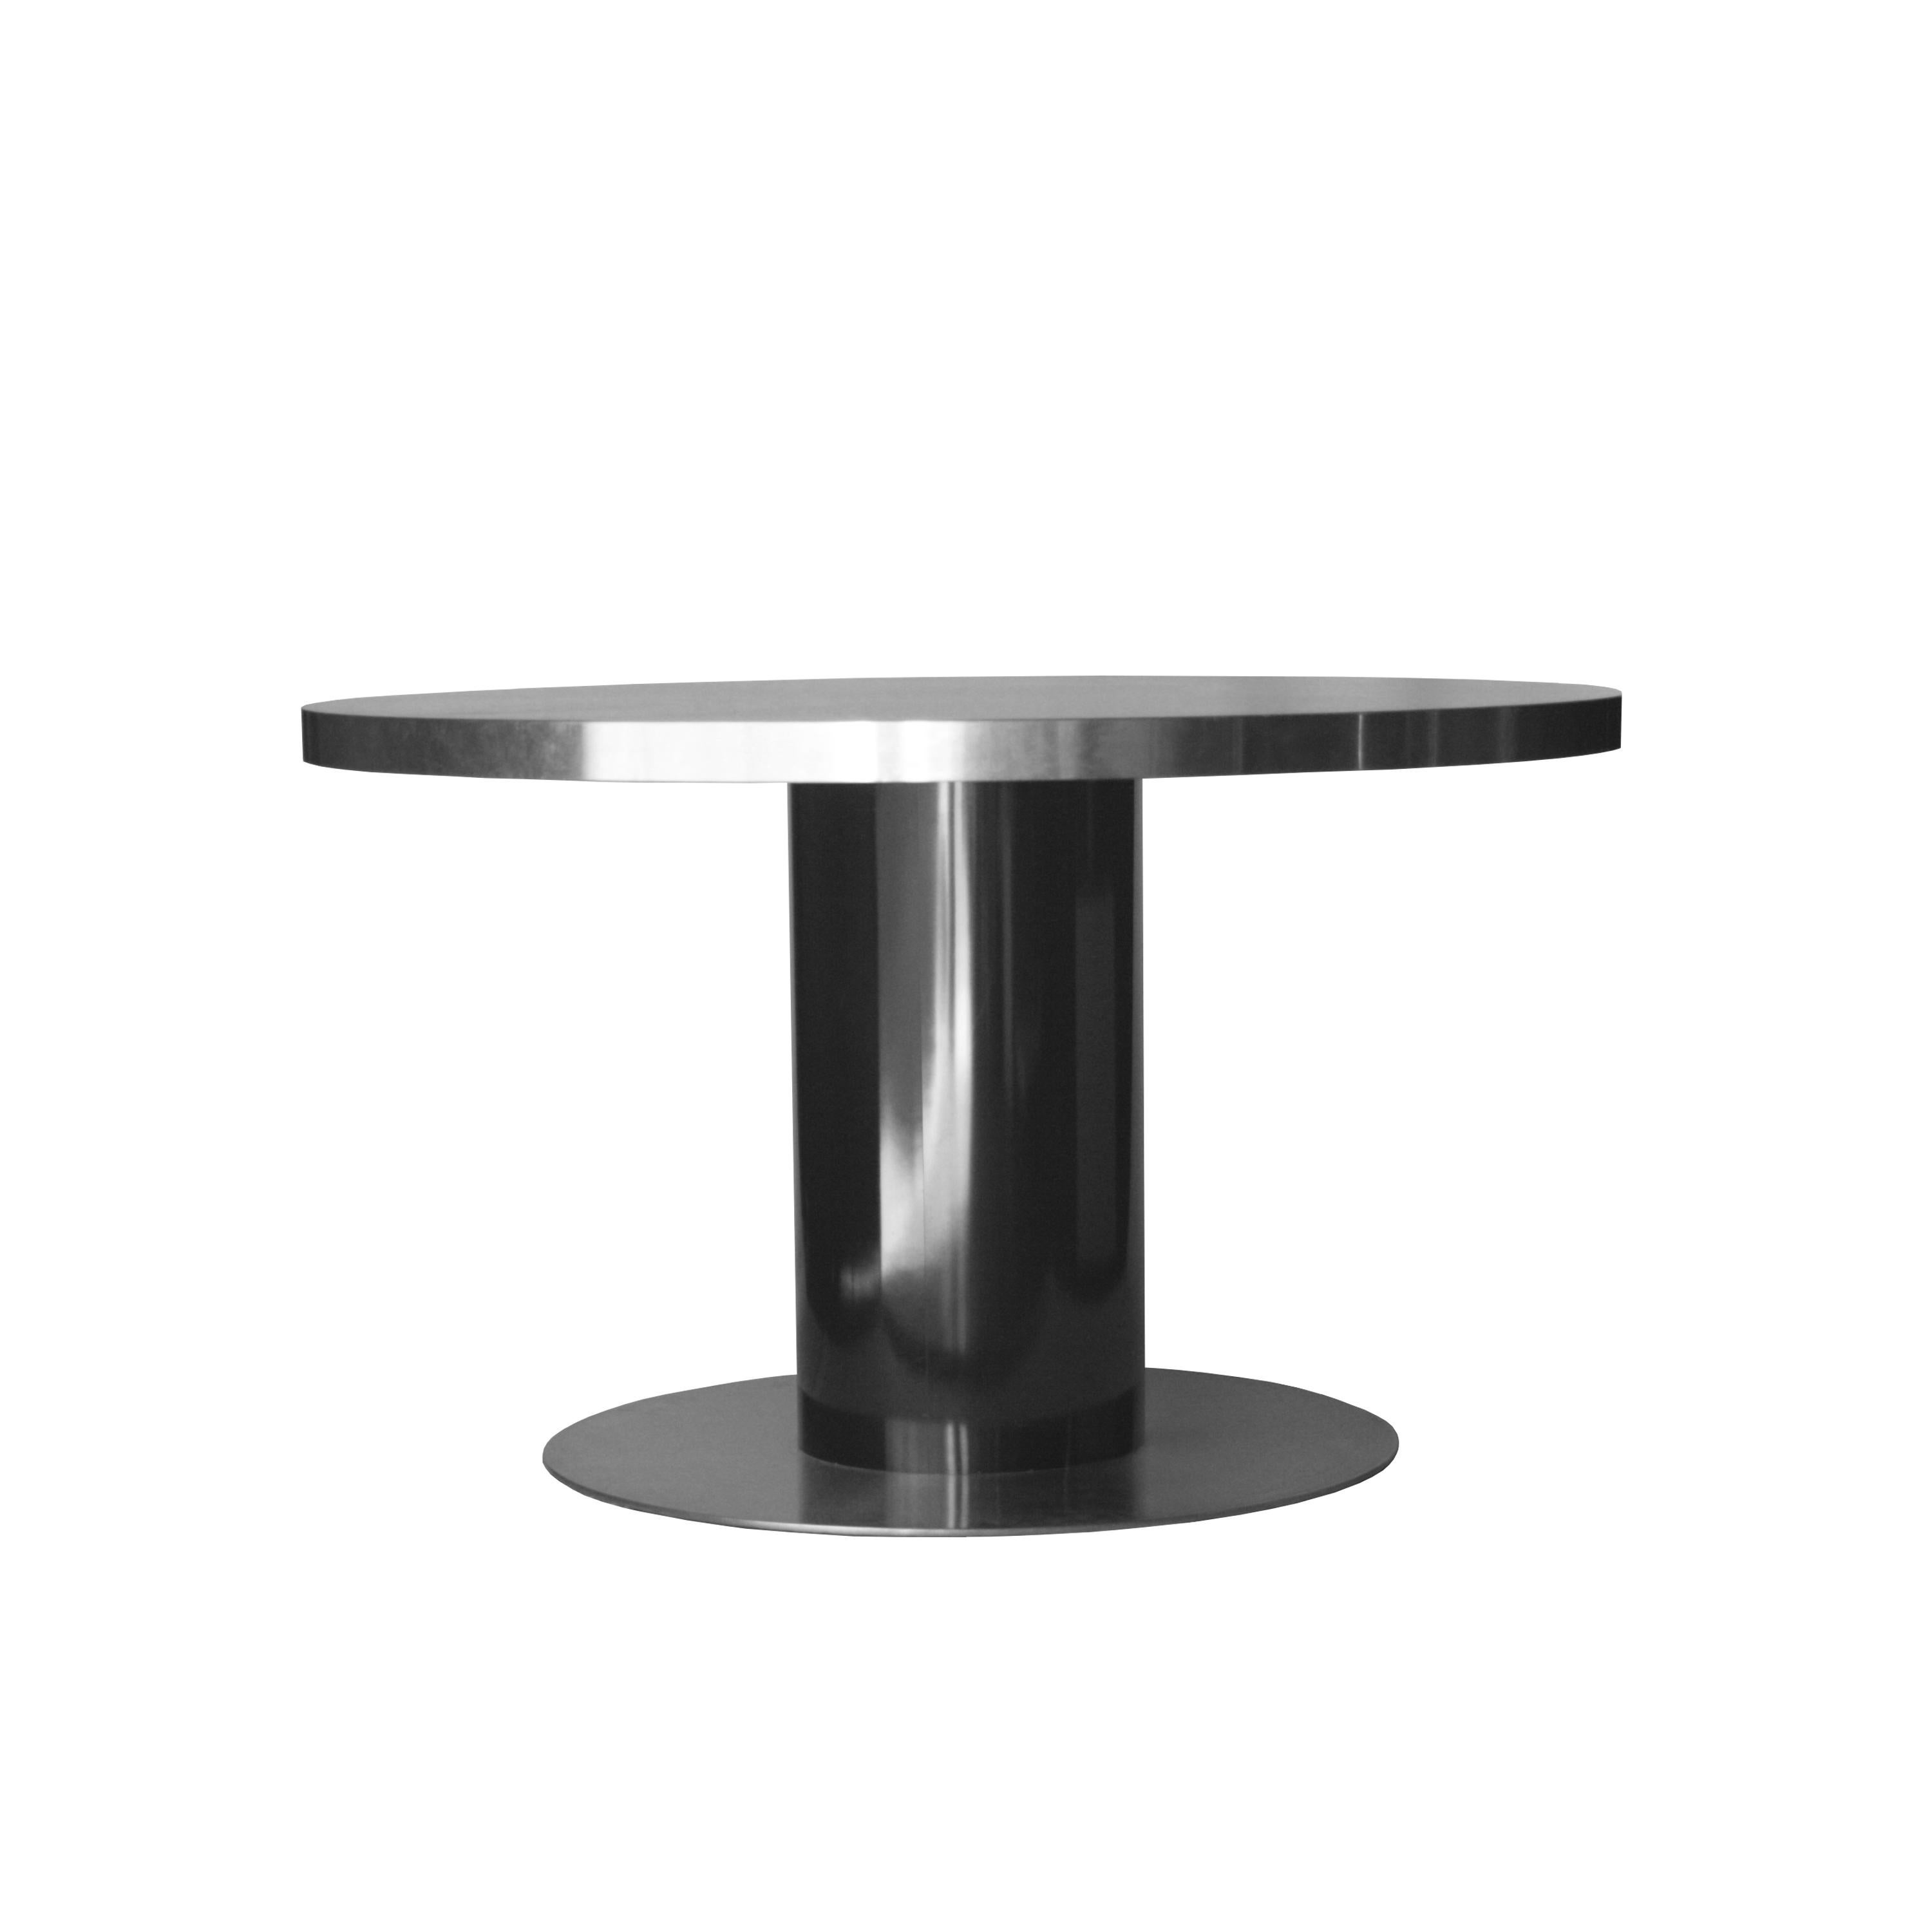 Circular dining table designed by Willy Rizzo, with black lacquered metal structure with base and profile in chromed steel and top in high gloss lacquered wood.